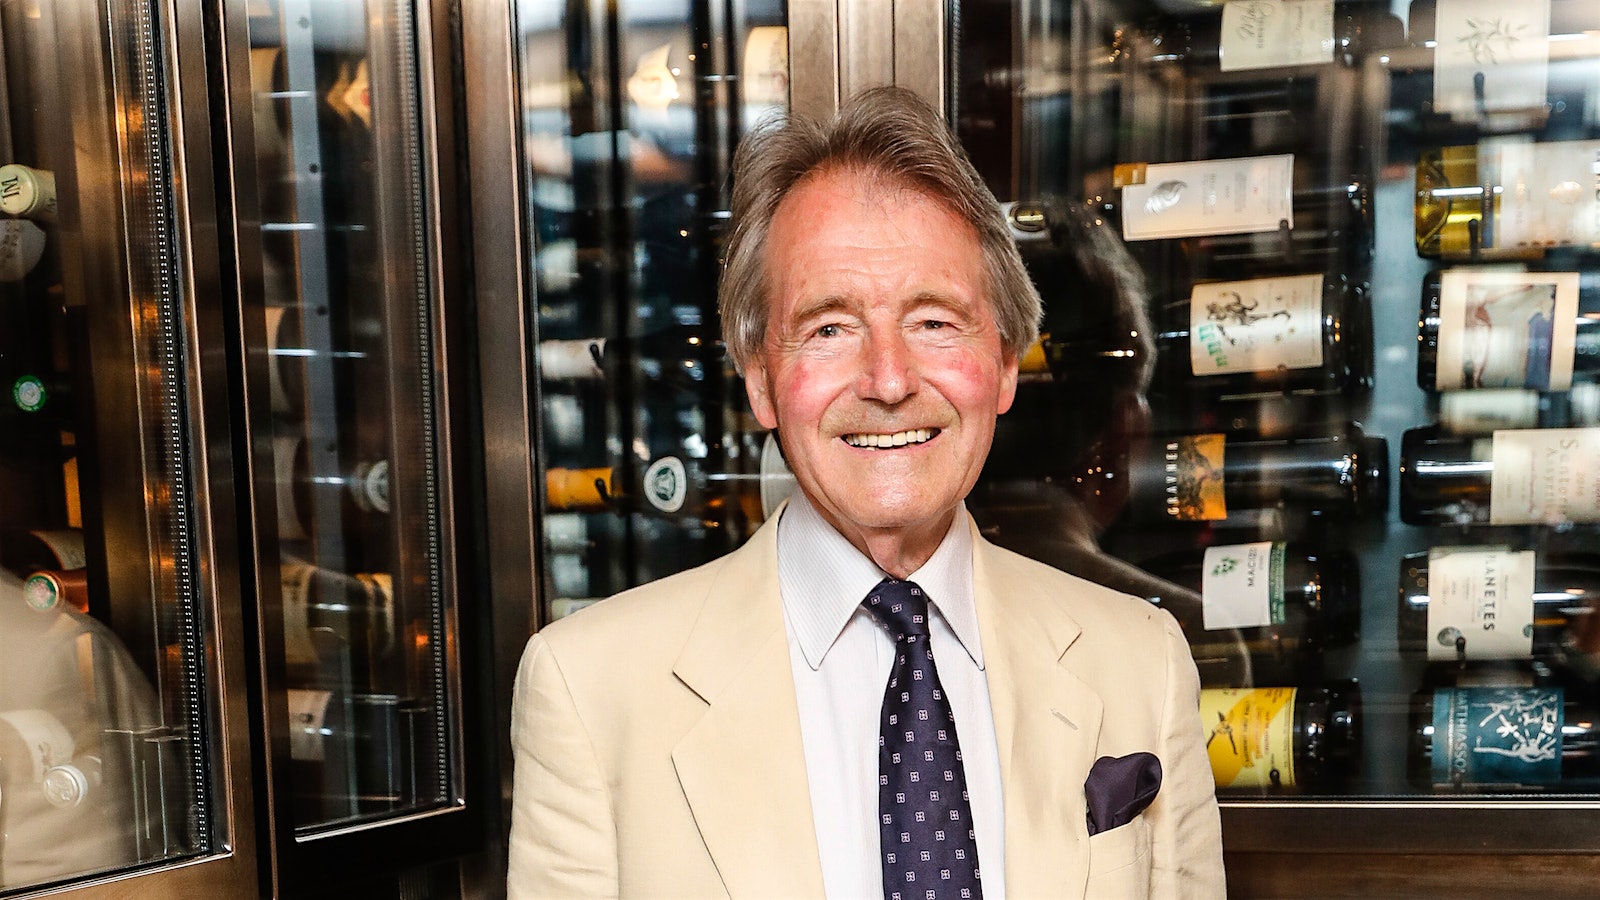  Wine merchant Steven Spurrier will be remembered most for organizing the 1976 Paris Tasting, but he was a dedicated educator as well.